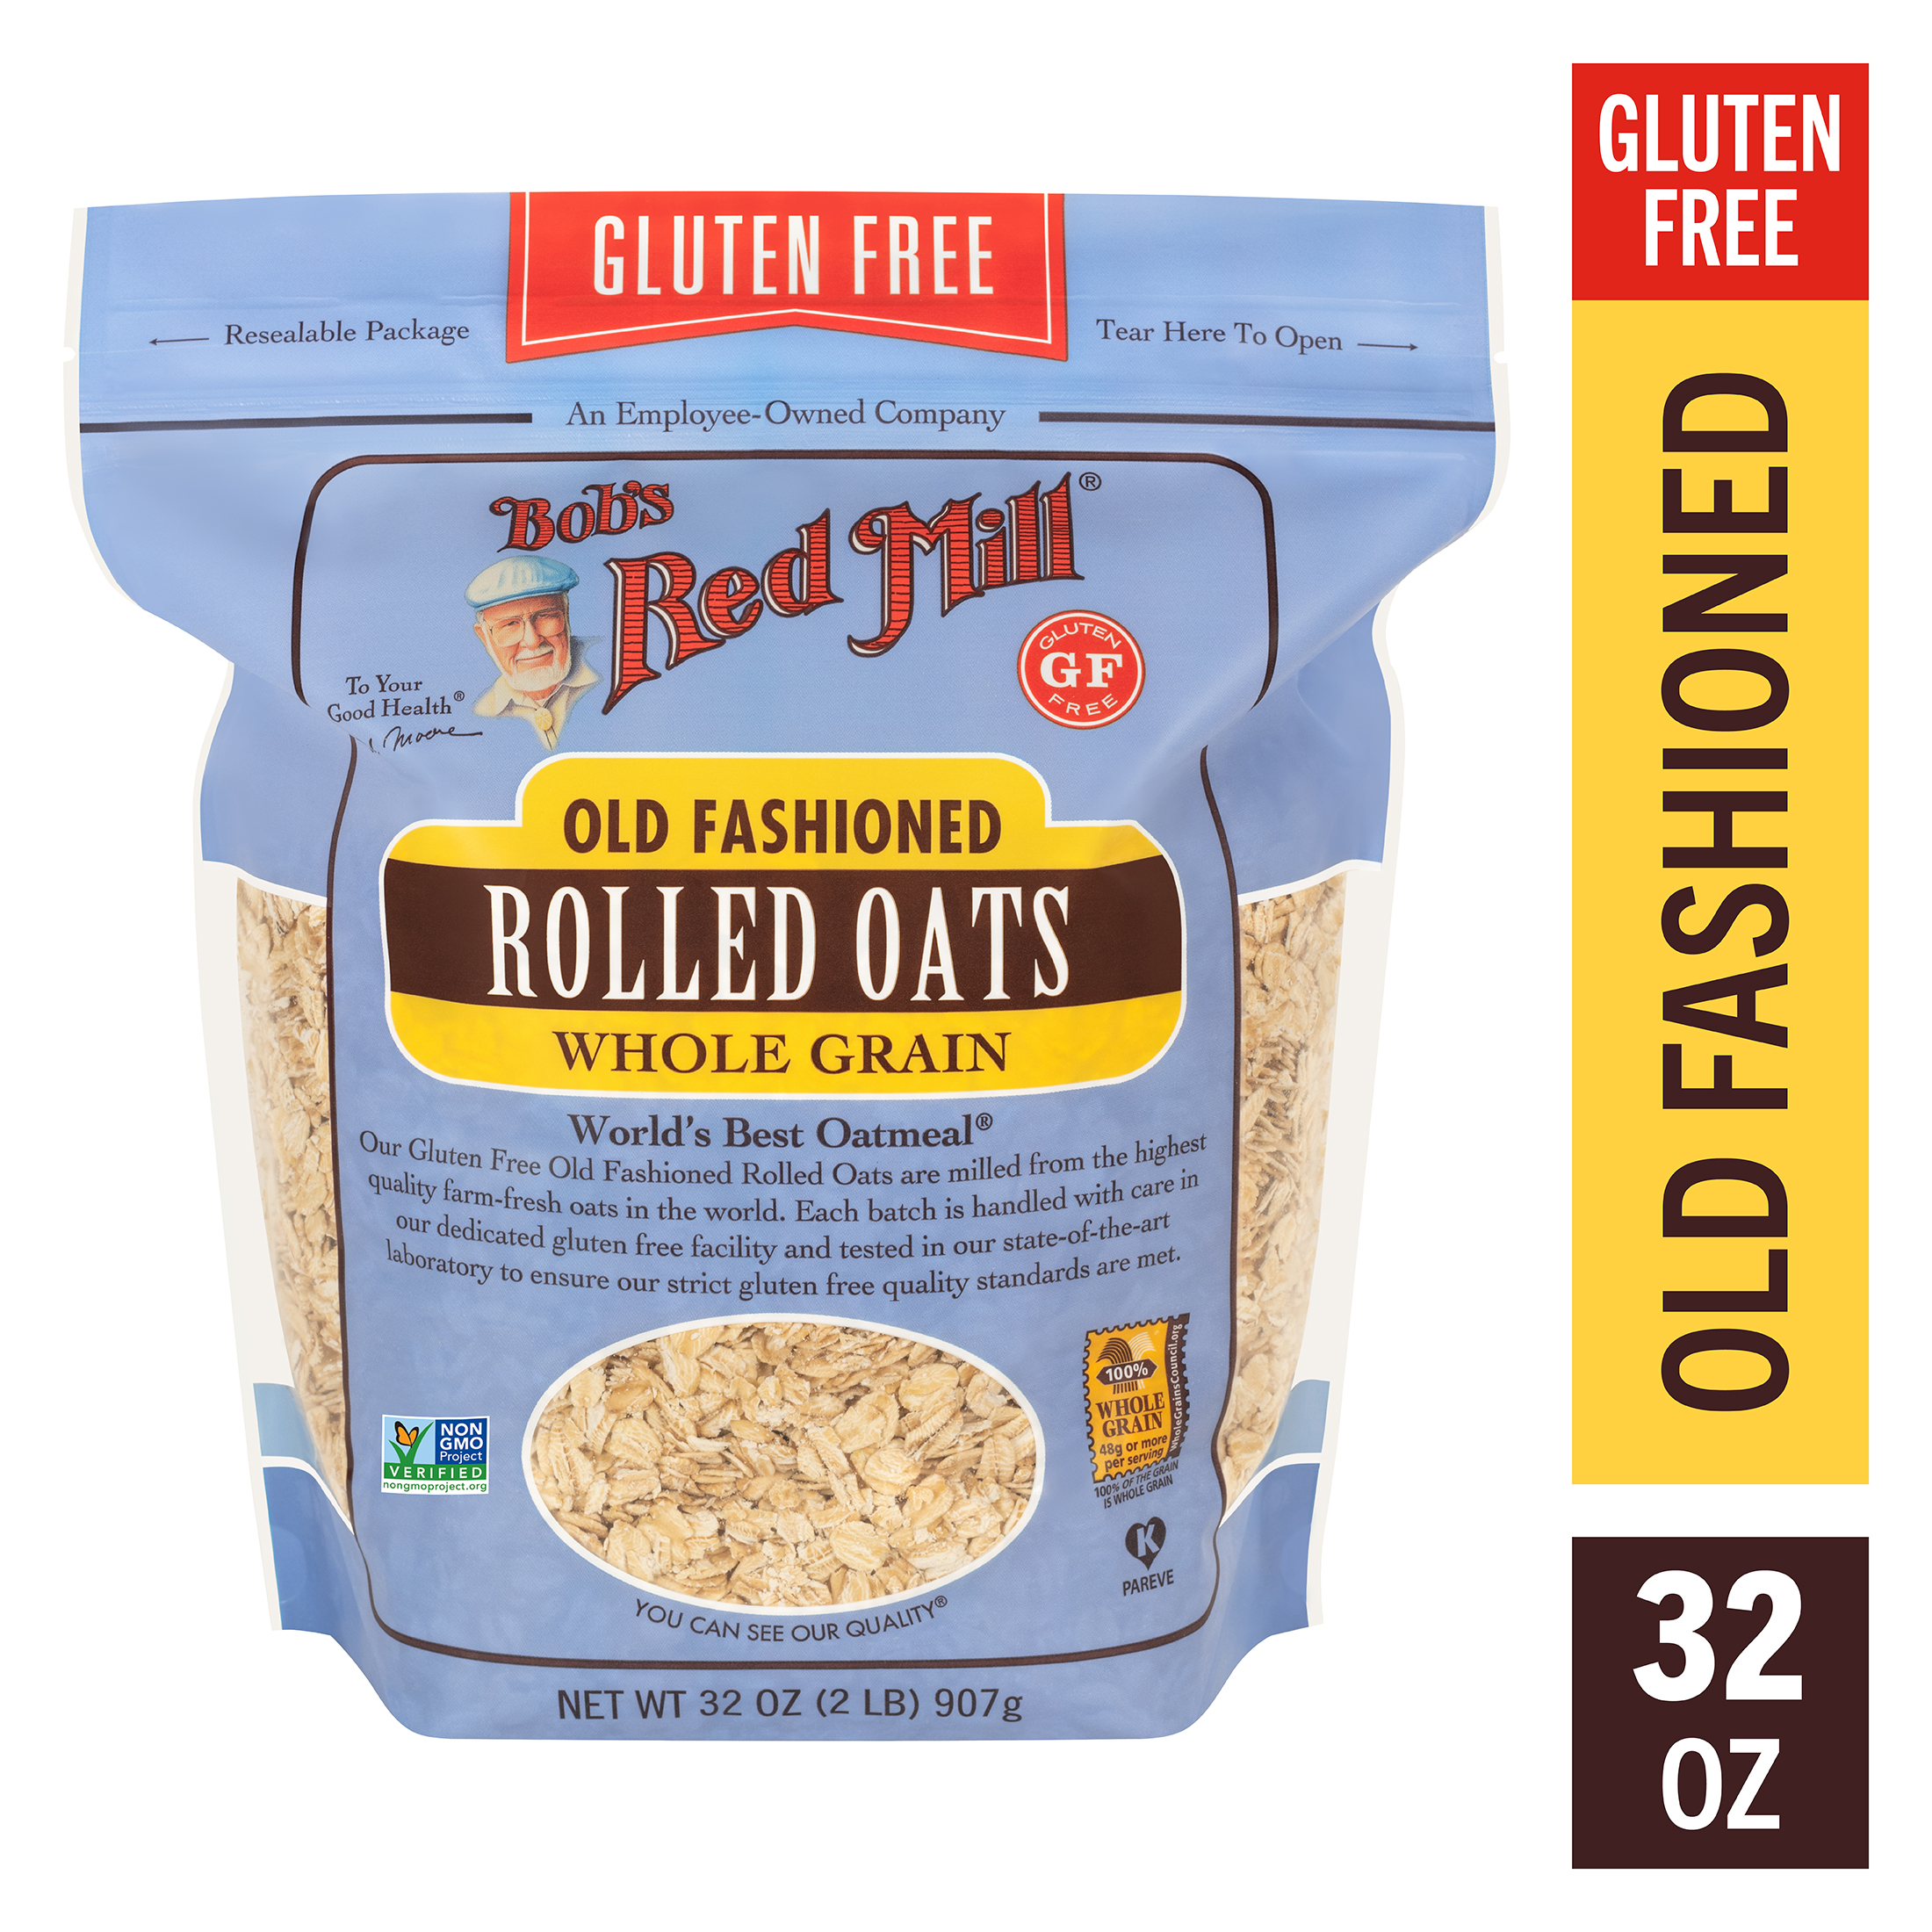 Bob's Red Mill Gluten Free Non-GMO Old Fashioned Rolled Oats, 32 oz Bag Shelf-Stable Ready-to-Cook - image 2 of 6